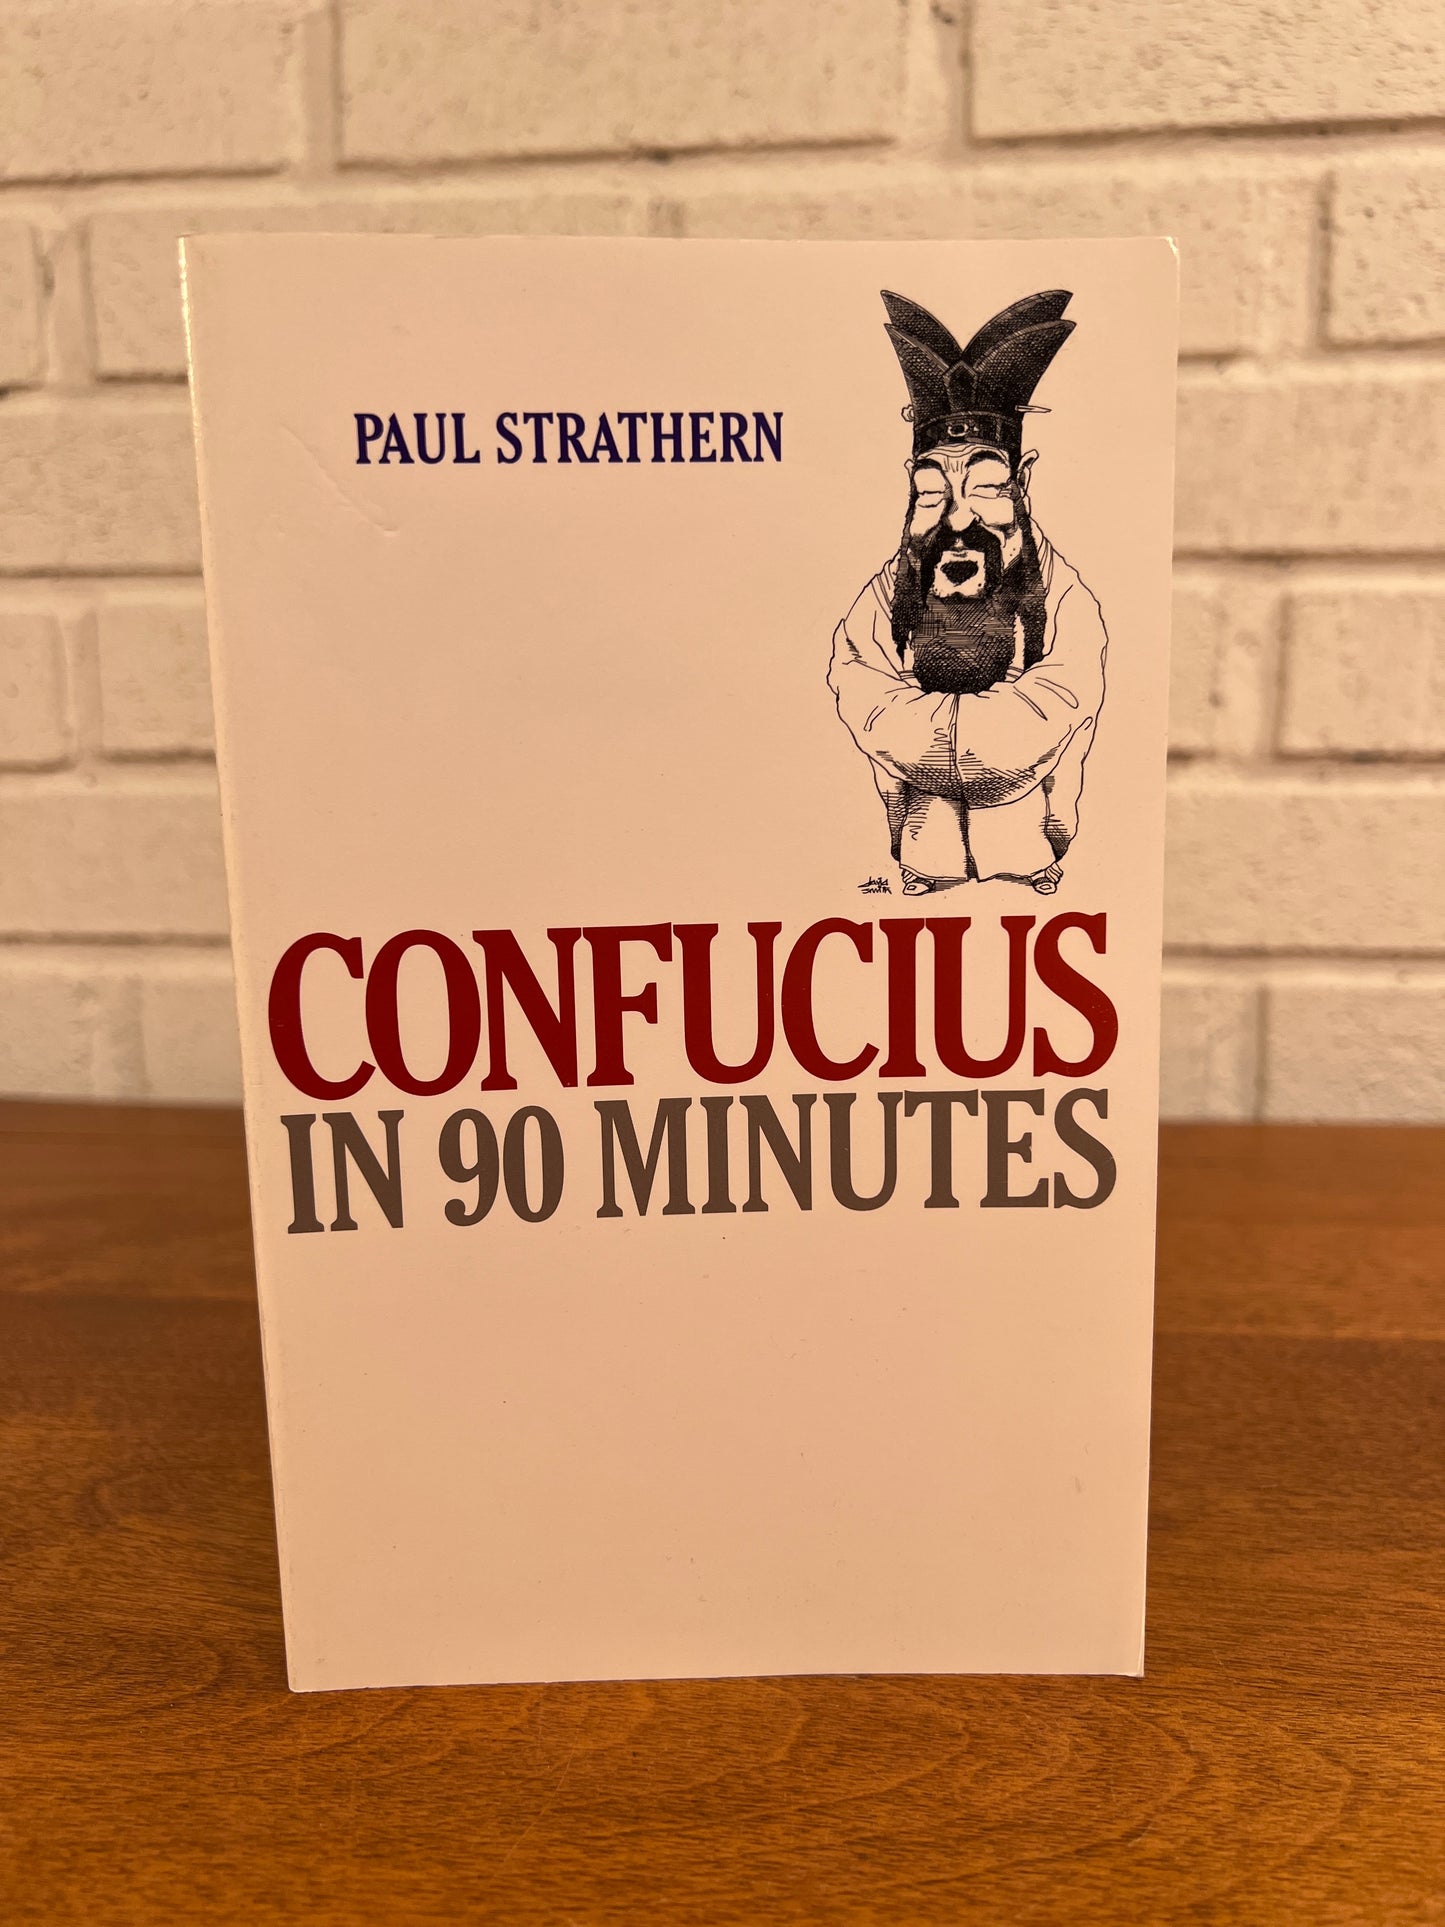 Confucius in 90 Minutes by Paul Strathern